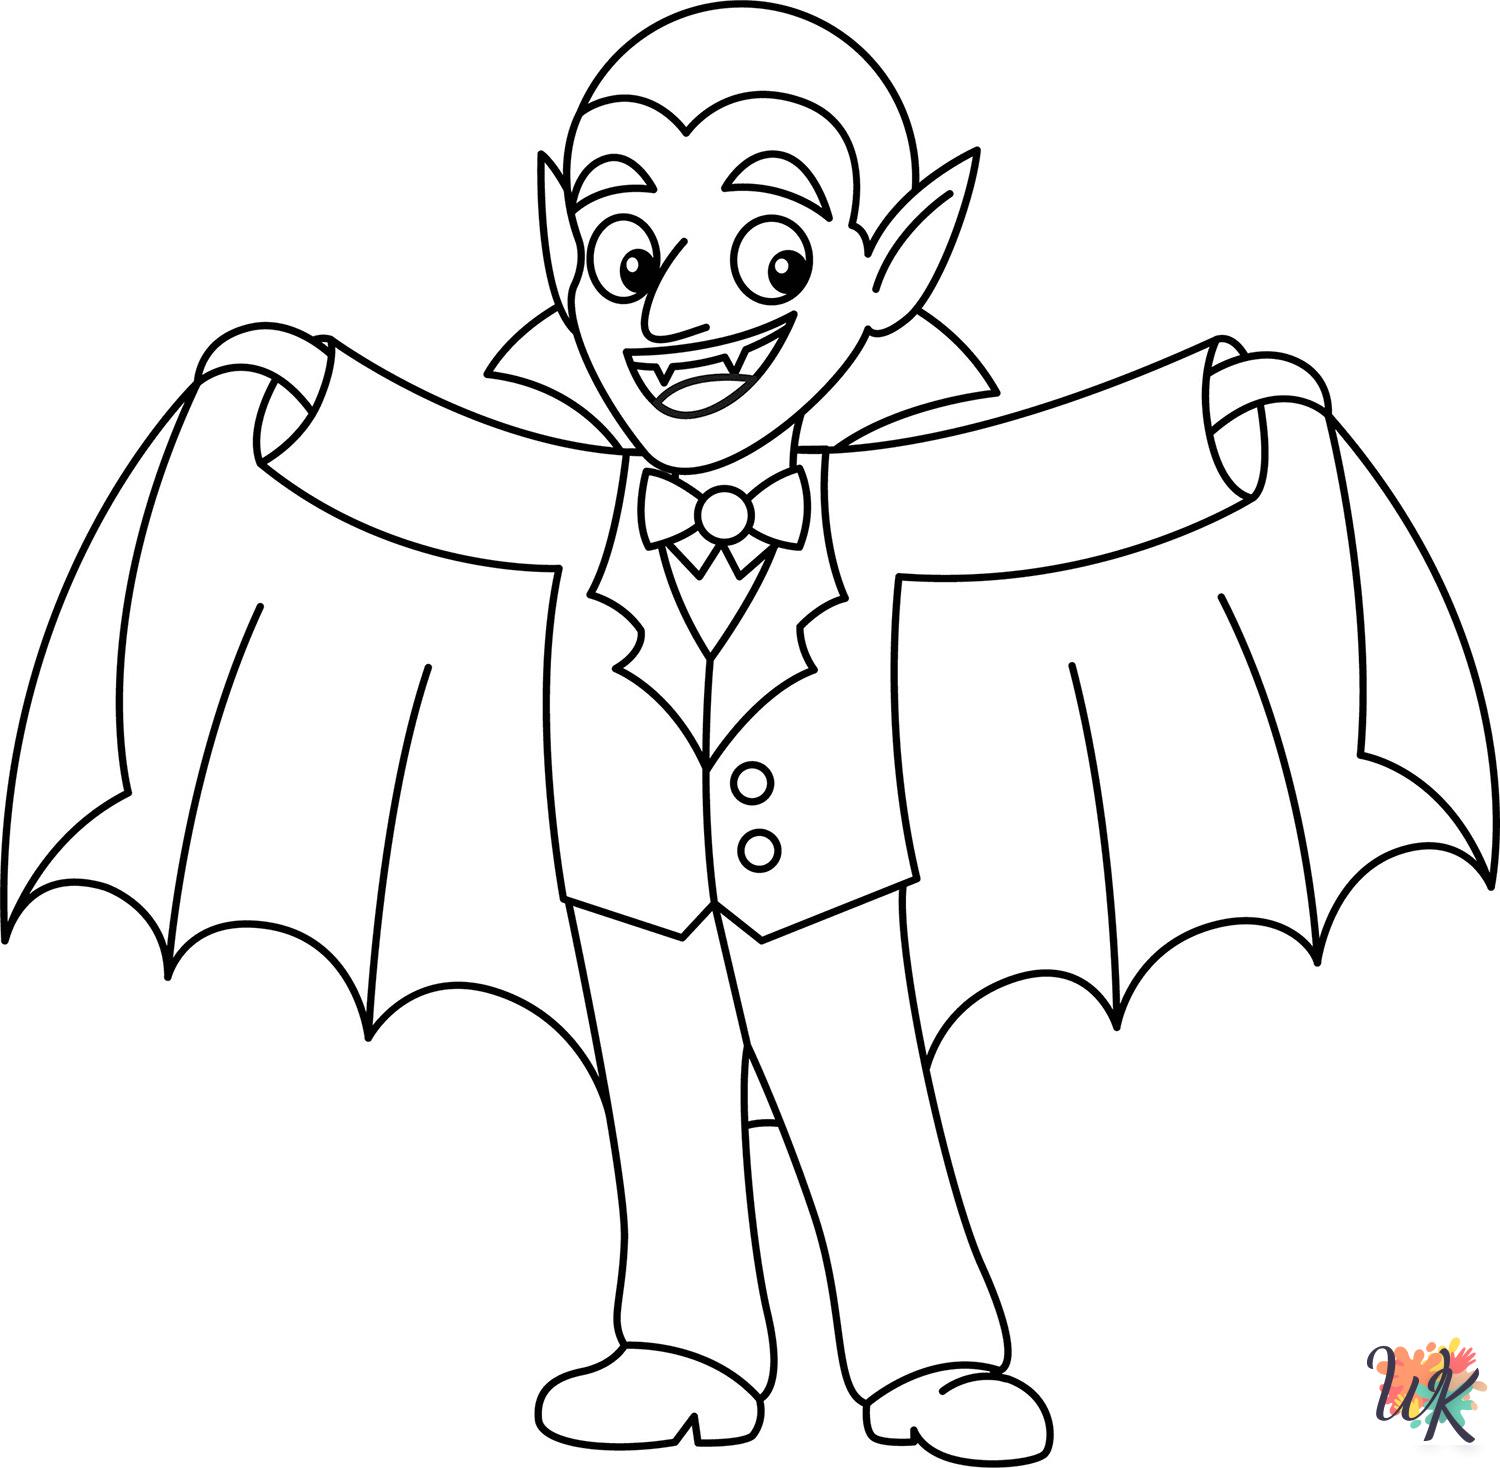 Dracula ornament coloring pages